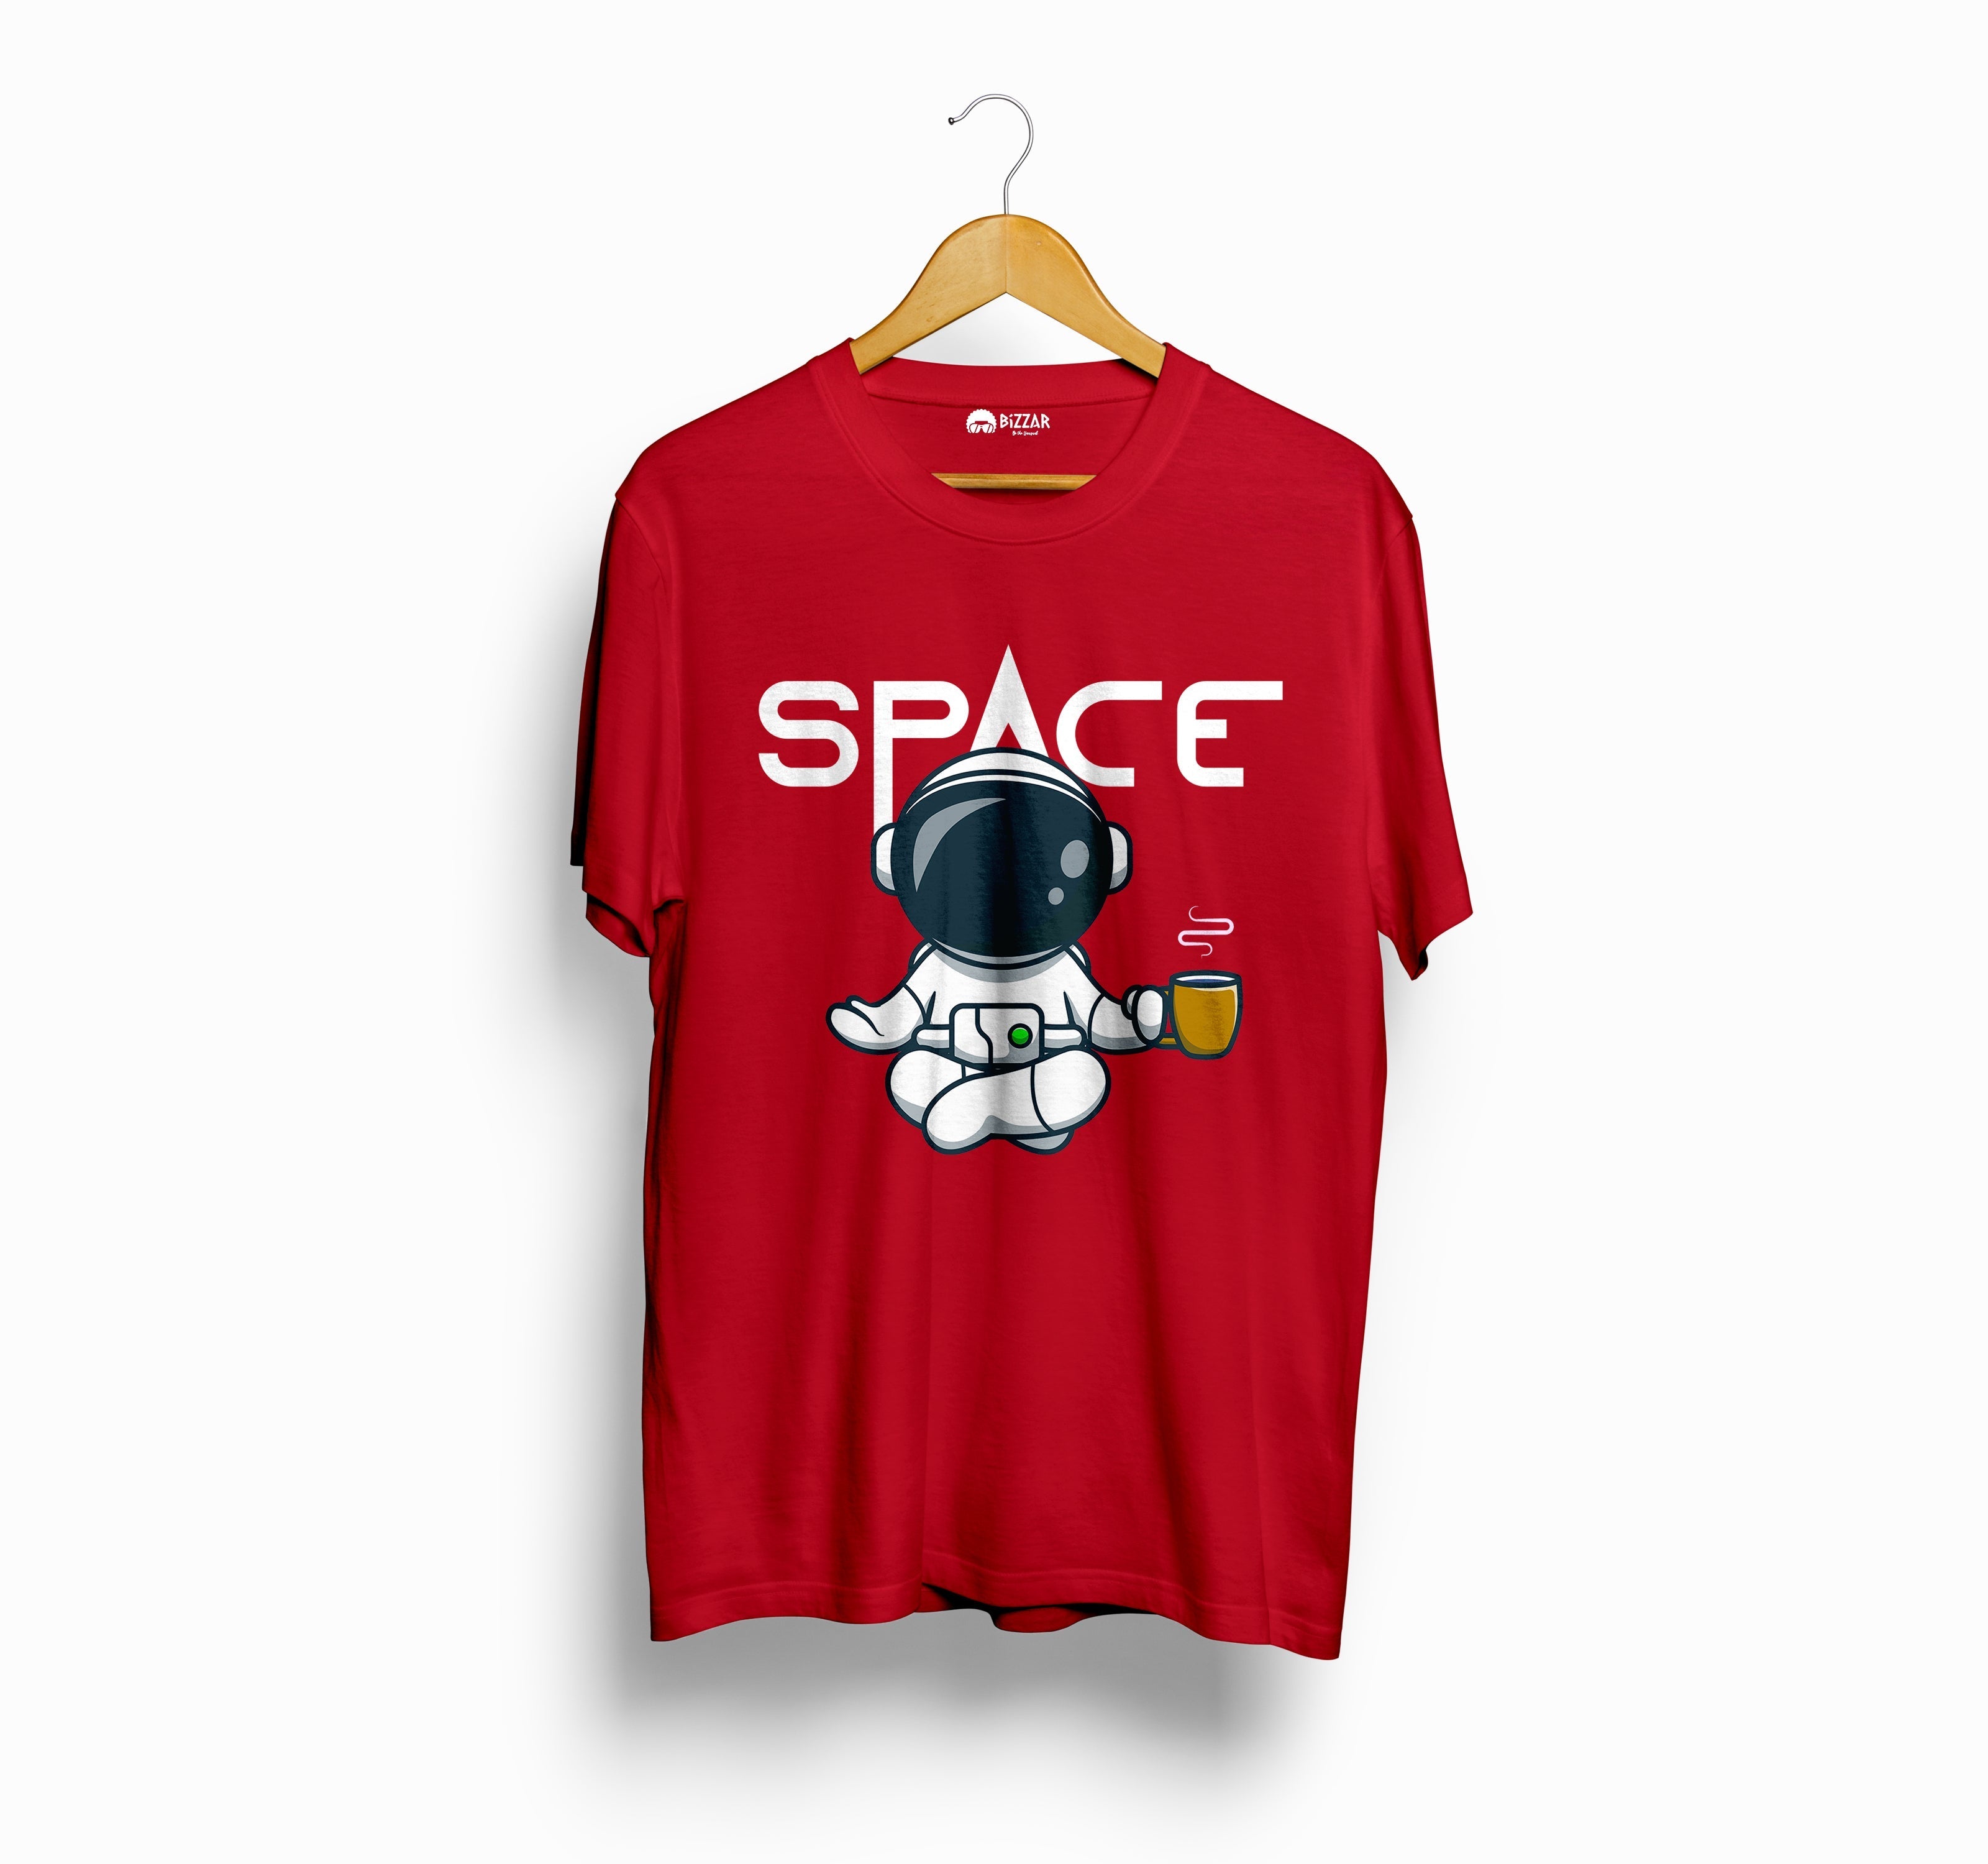 Bizzar's Space Red T-Shirt